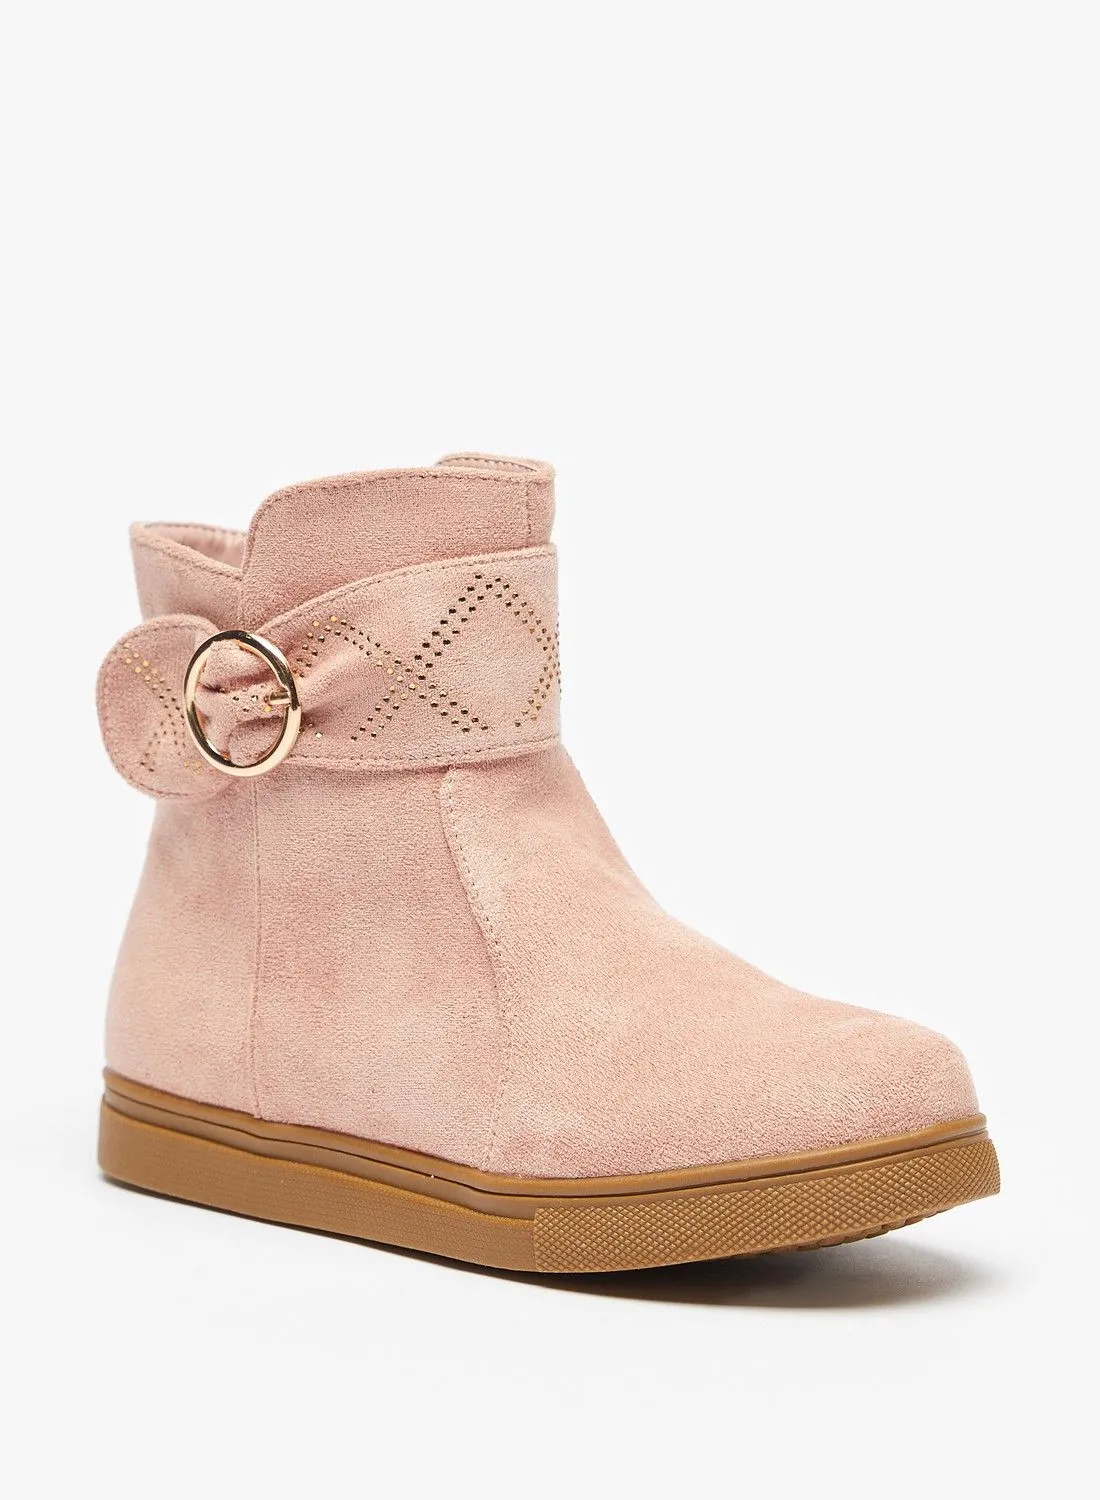 shoexpress Embellished Slip On High Top Boots with Zip Closure and Buckle Accent Pink